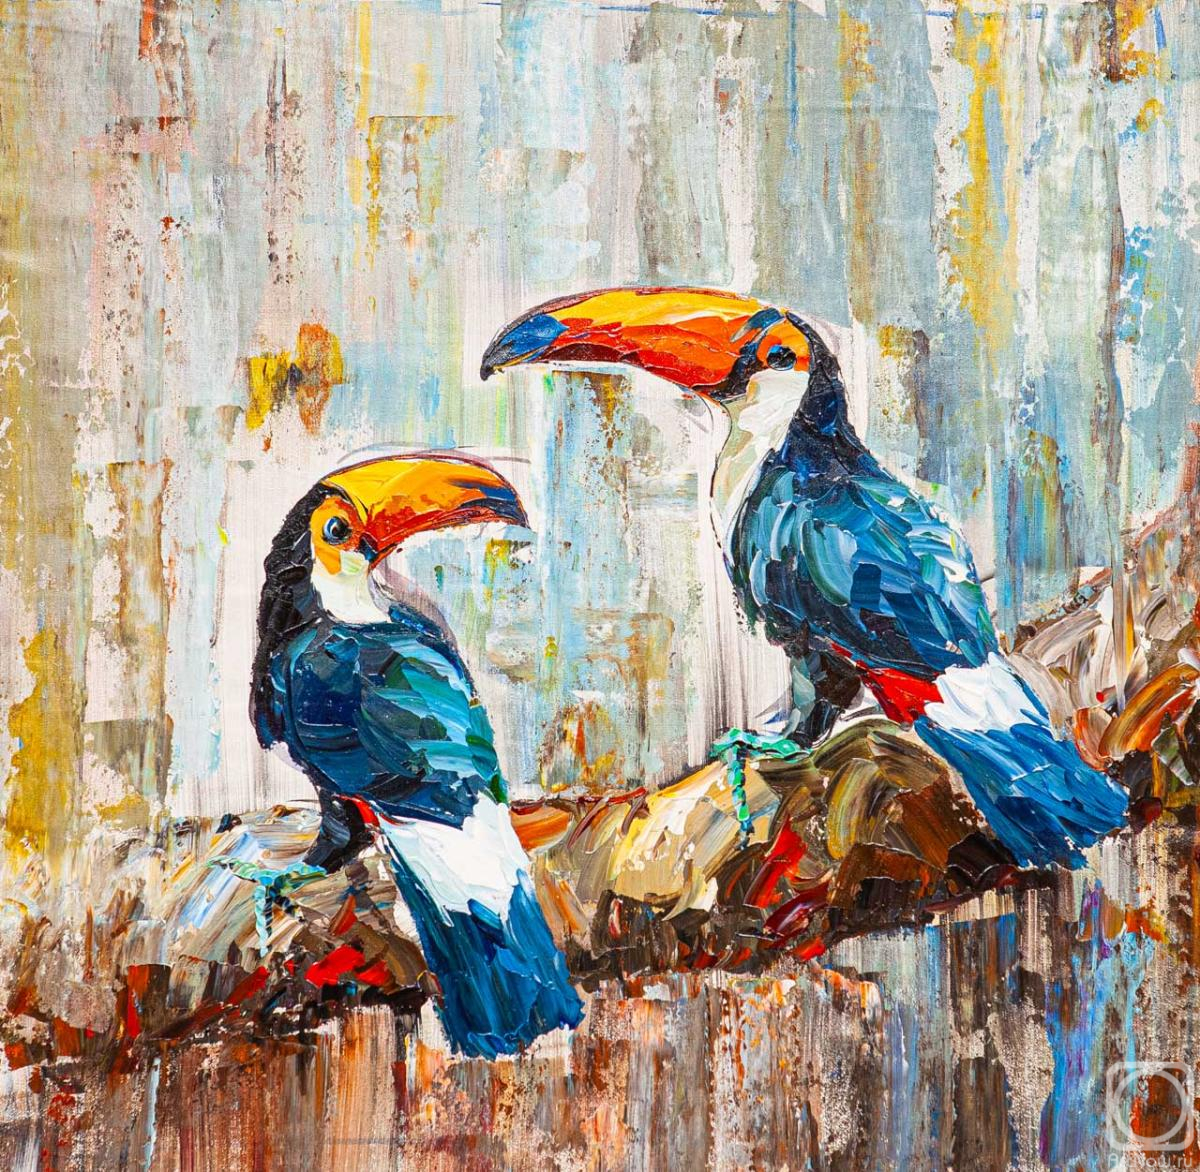 Rodries Jose. Two toucans on a branch